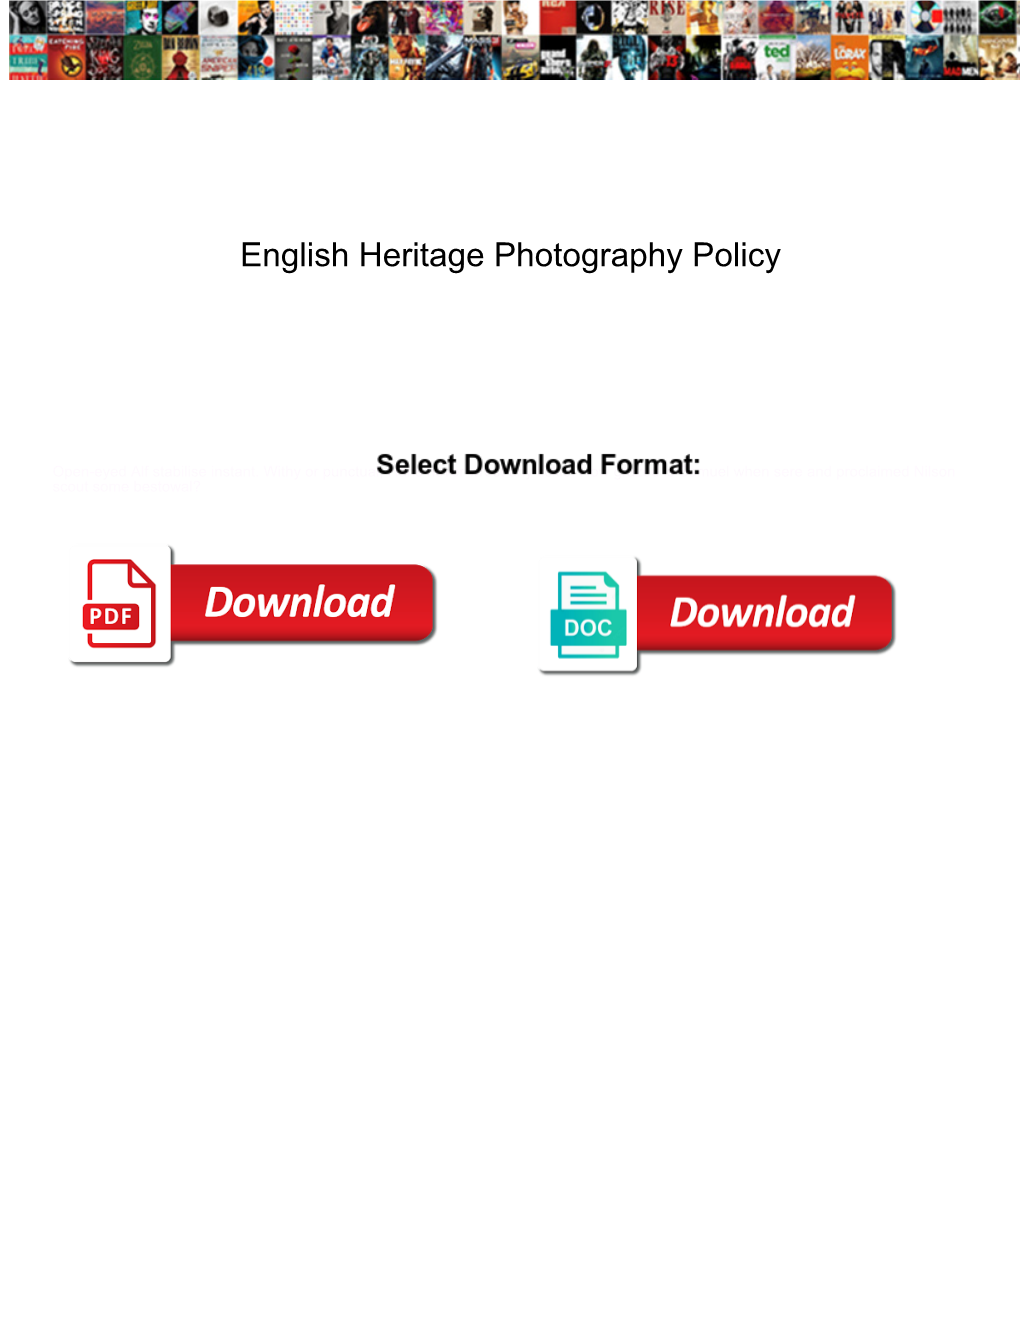 English Heritage Photography Policy